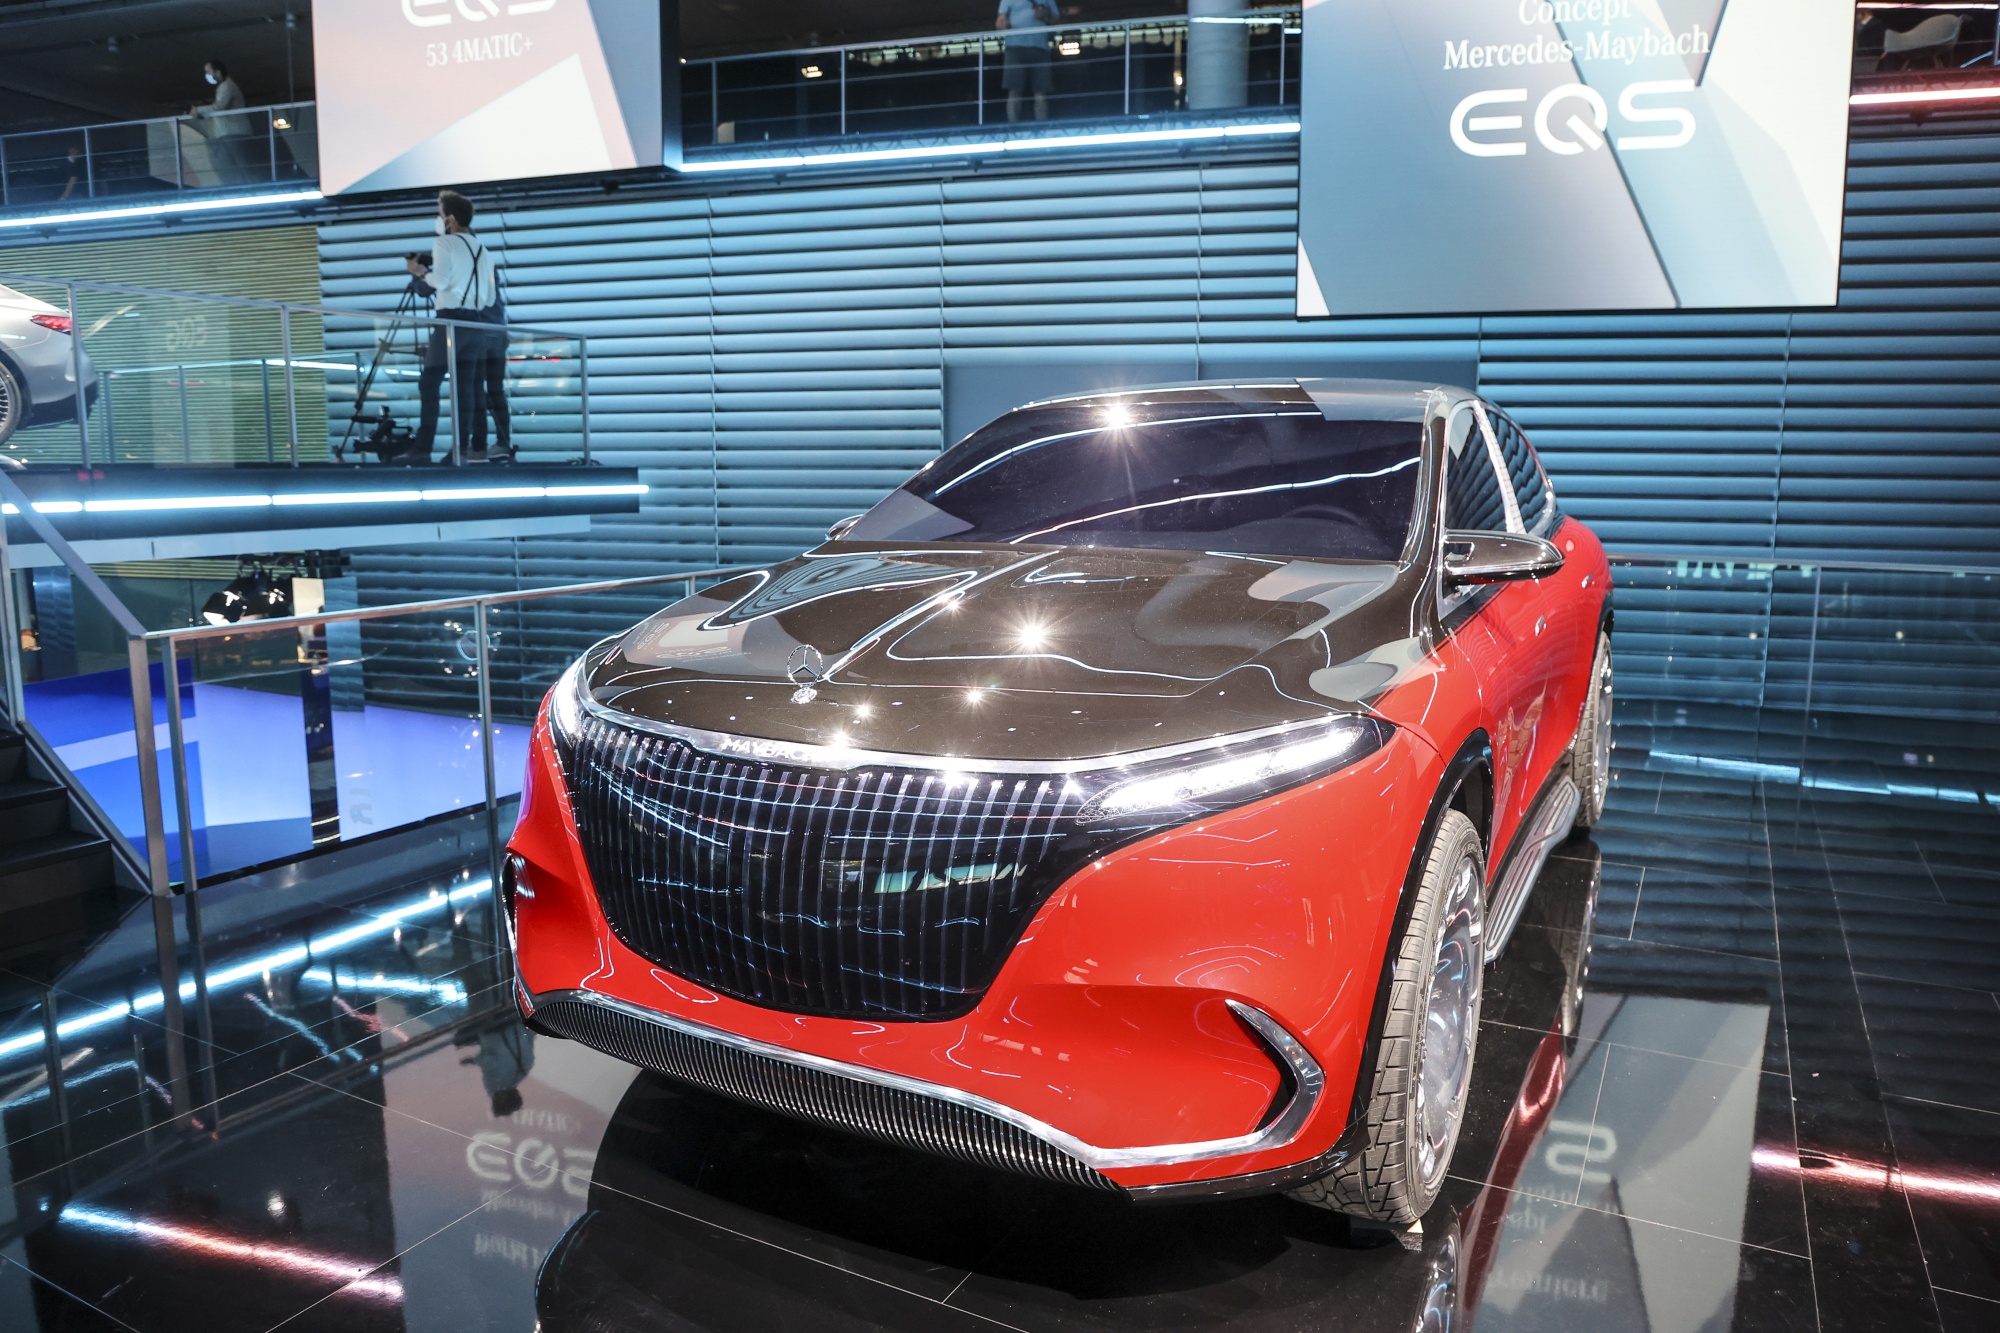 Mercedes-Benz AG Unveil Smart Brand Electric SUV Ahead of IAA Munich Motor Show 